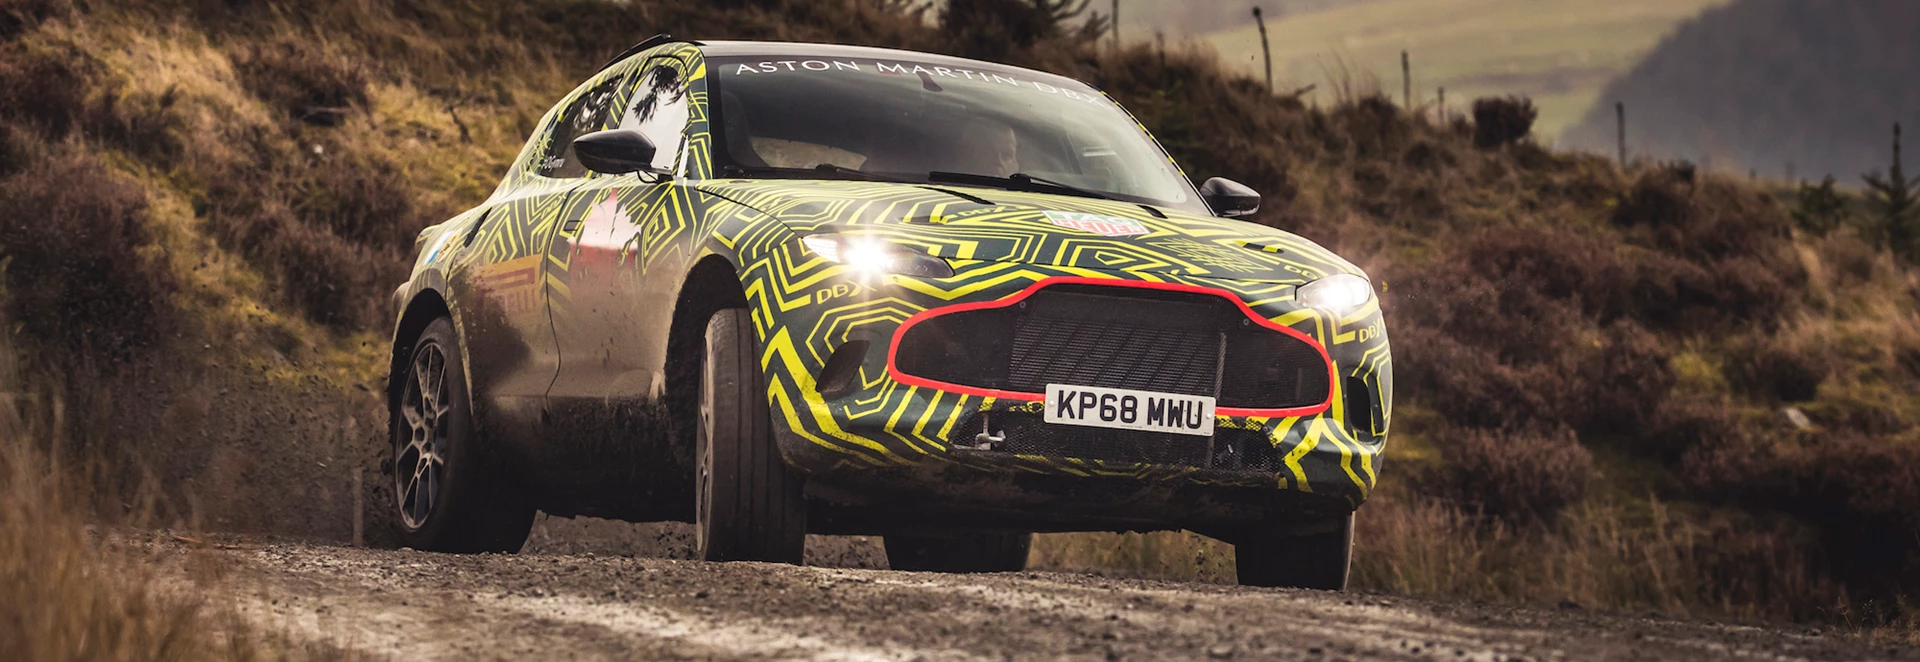 Aston Martin begins testing of its first SUV – the DBX